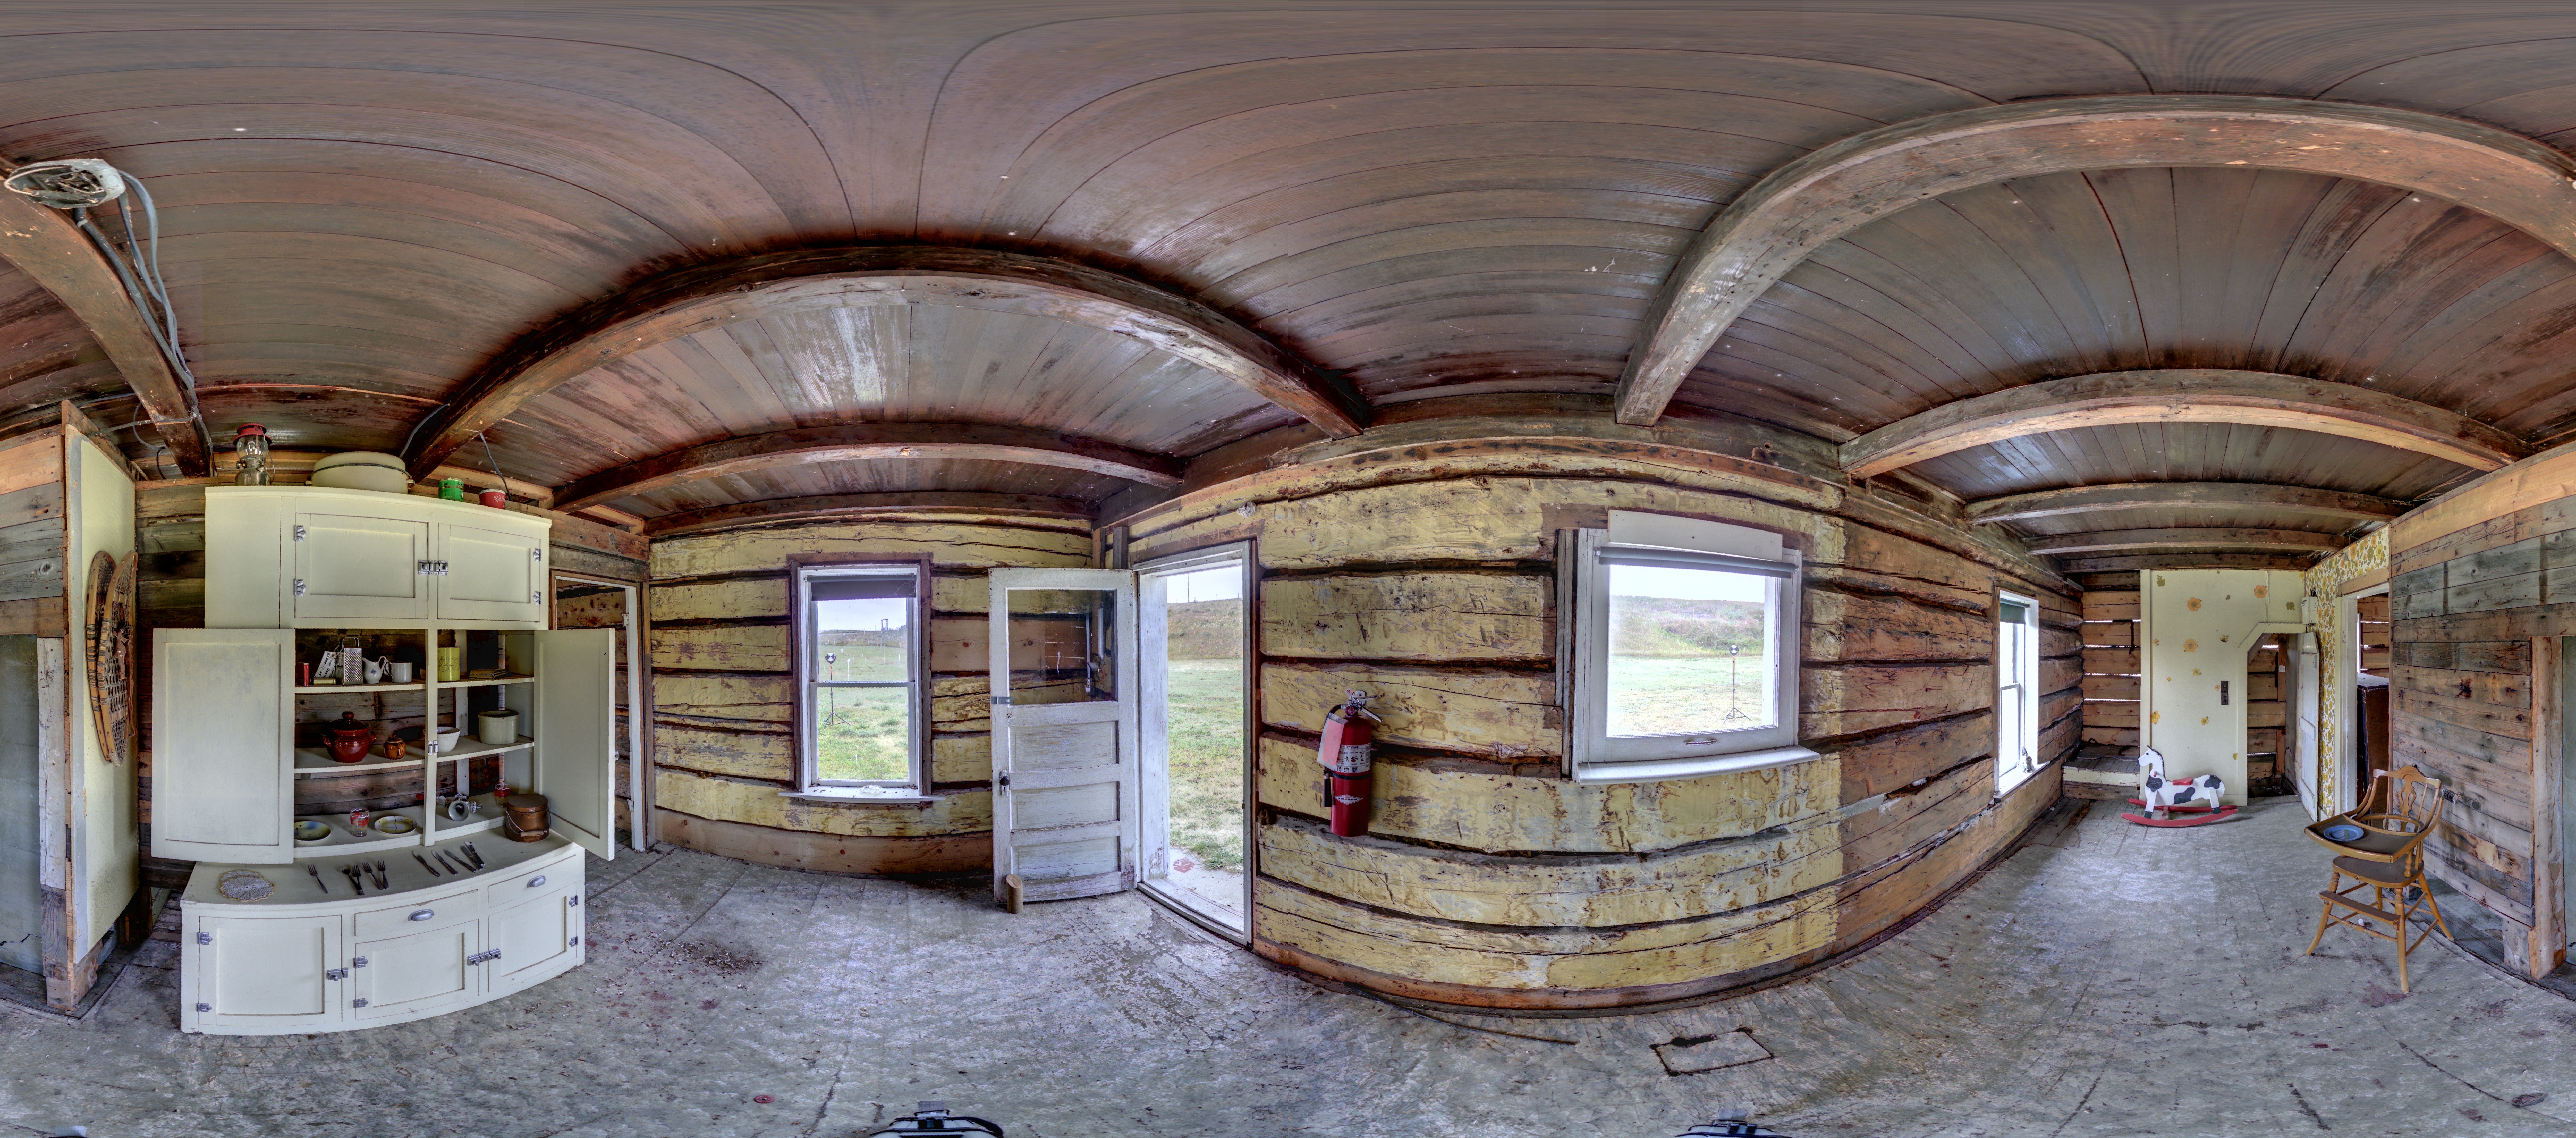 Panoramic image of scanning location 3 of the interior of the Foreman's House at Bar U Ranch